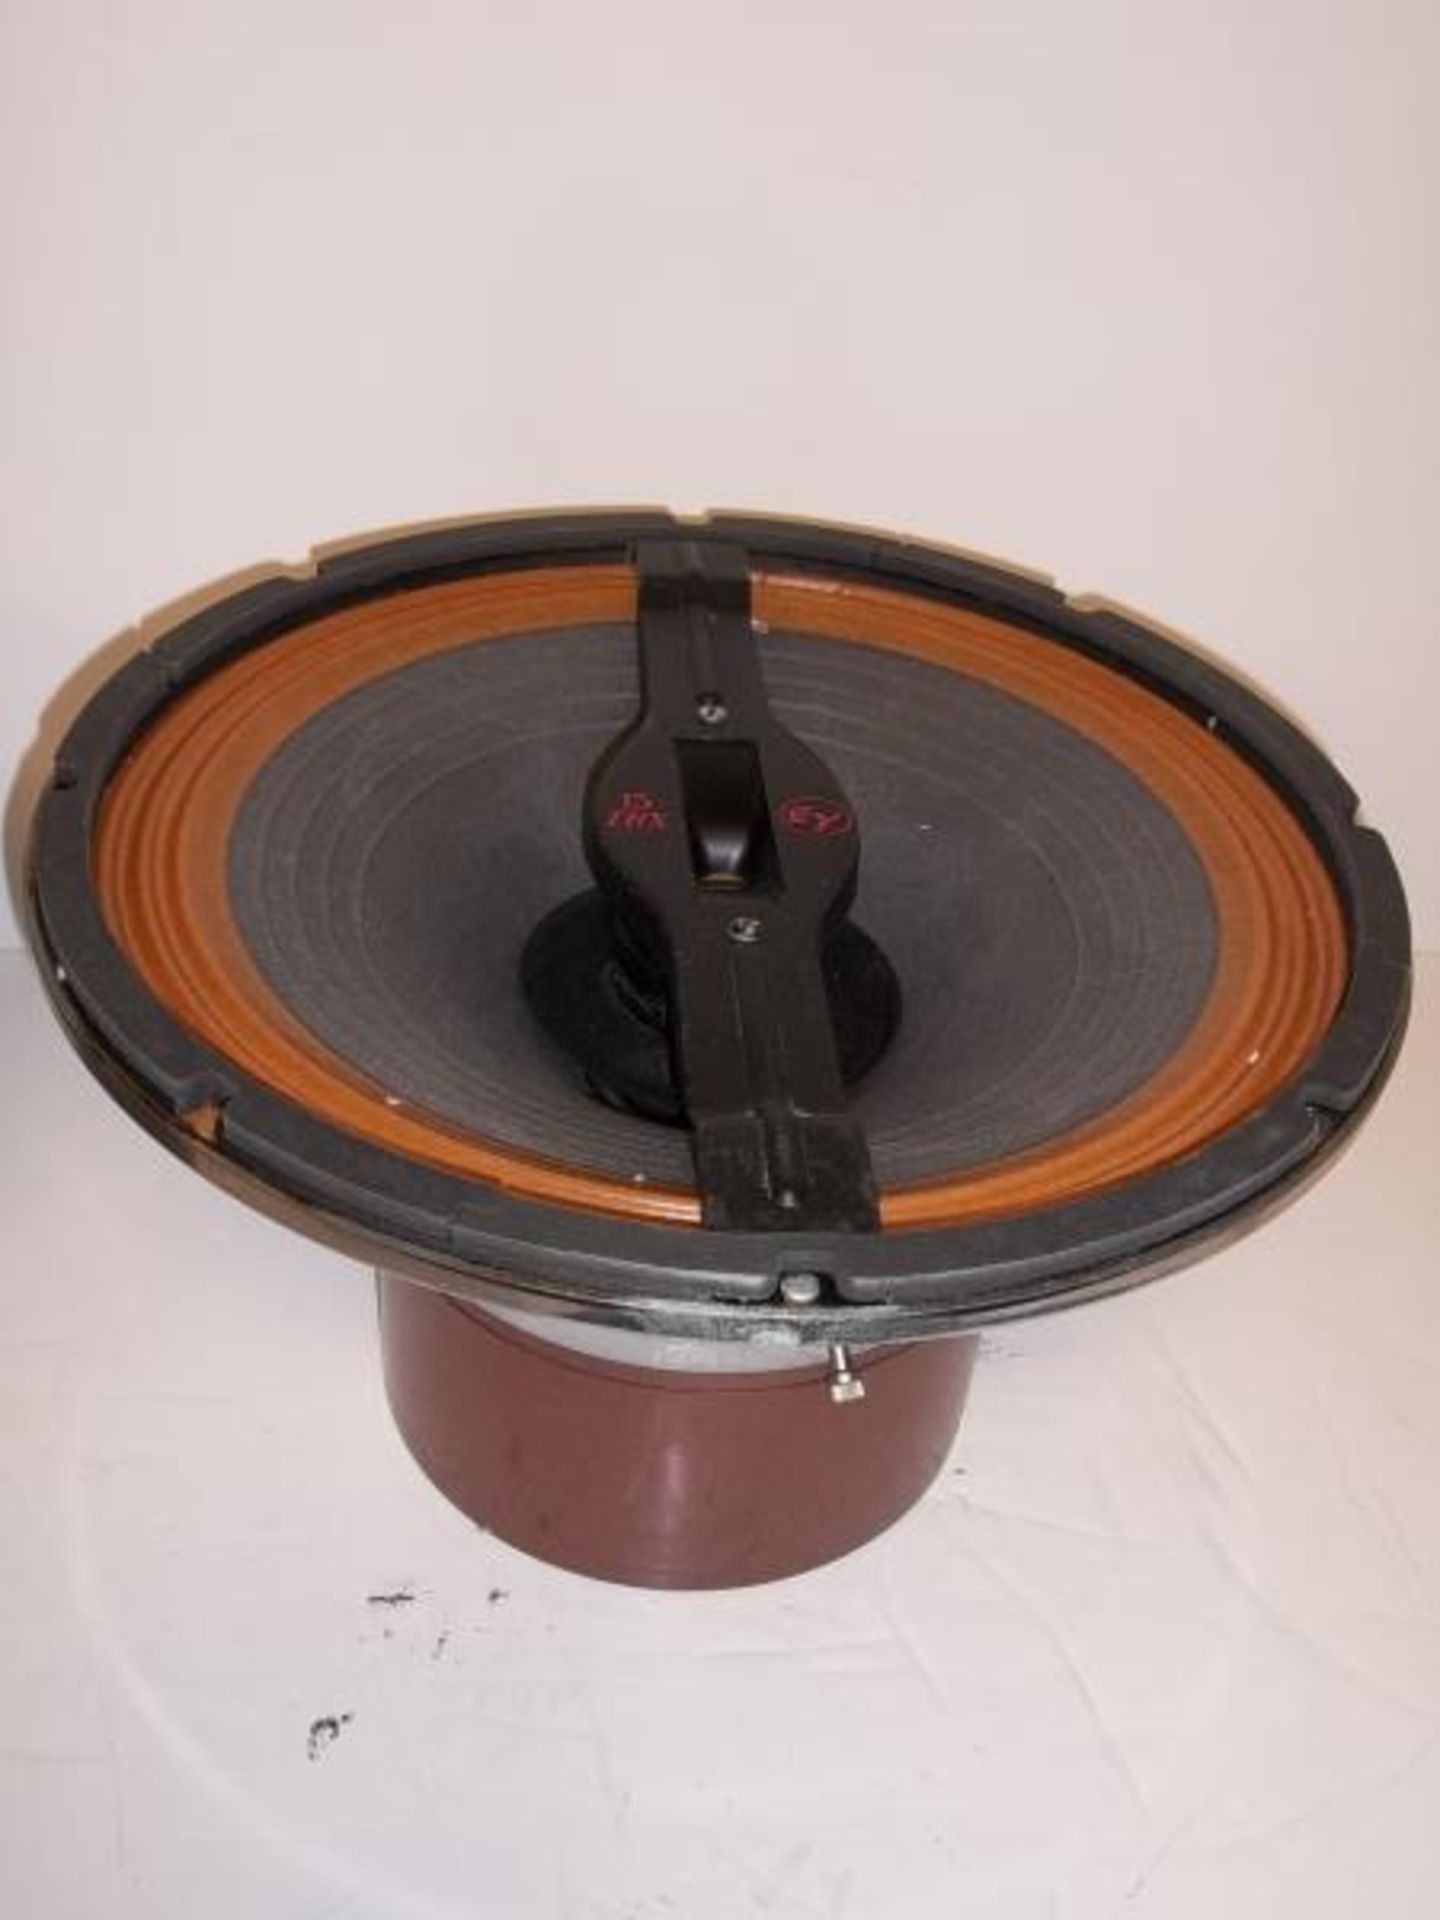 2 EV loud speakers, 15TRX, 15", one serial #841, cones are very dirty, cross chrome supports are - Image 6 of 7